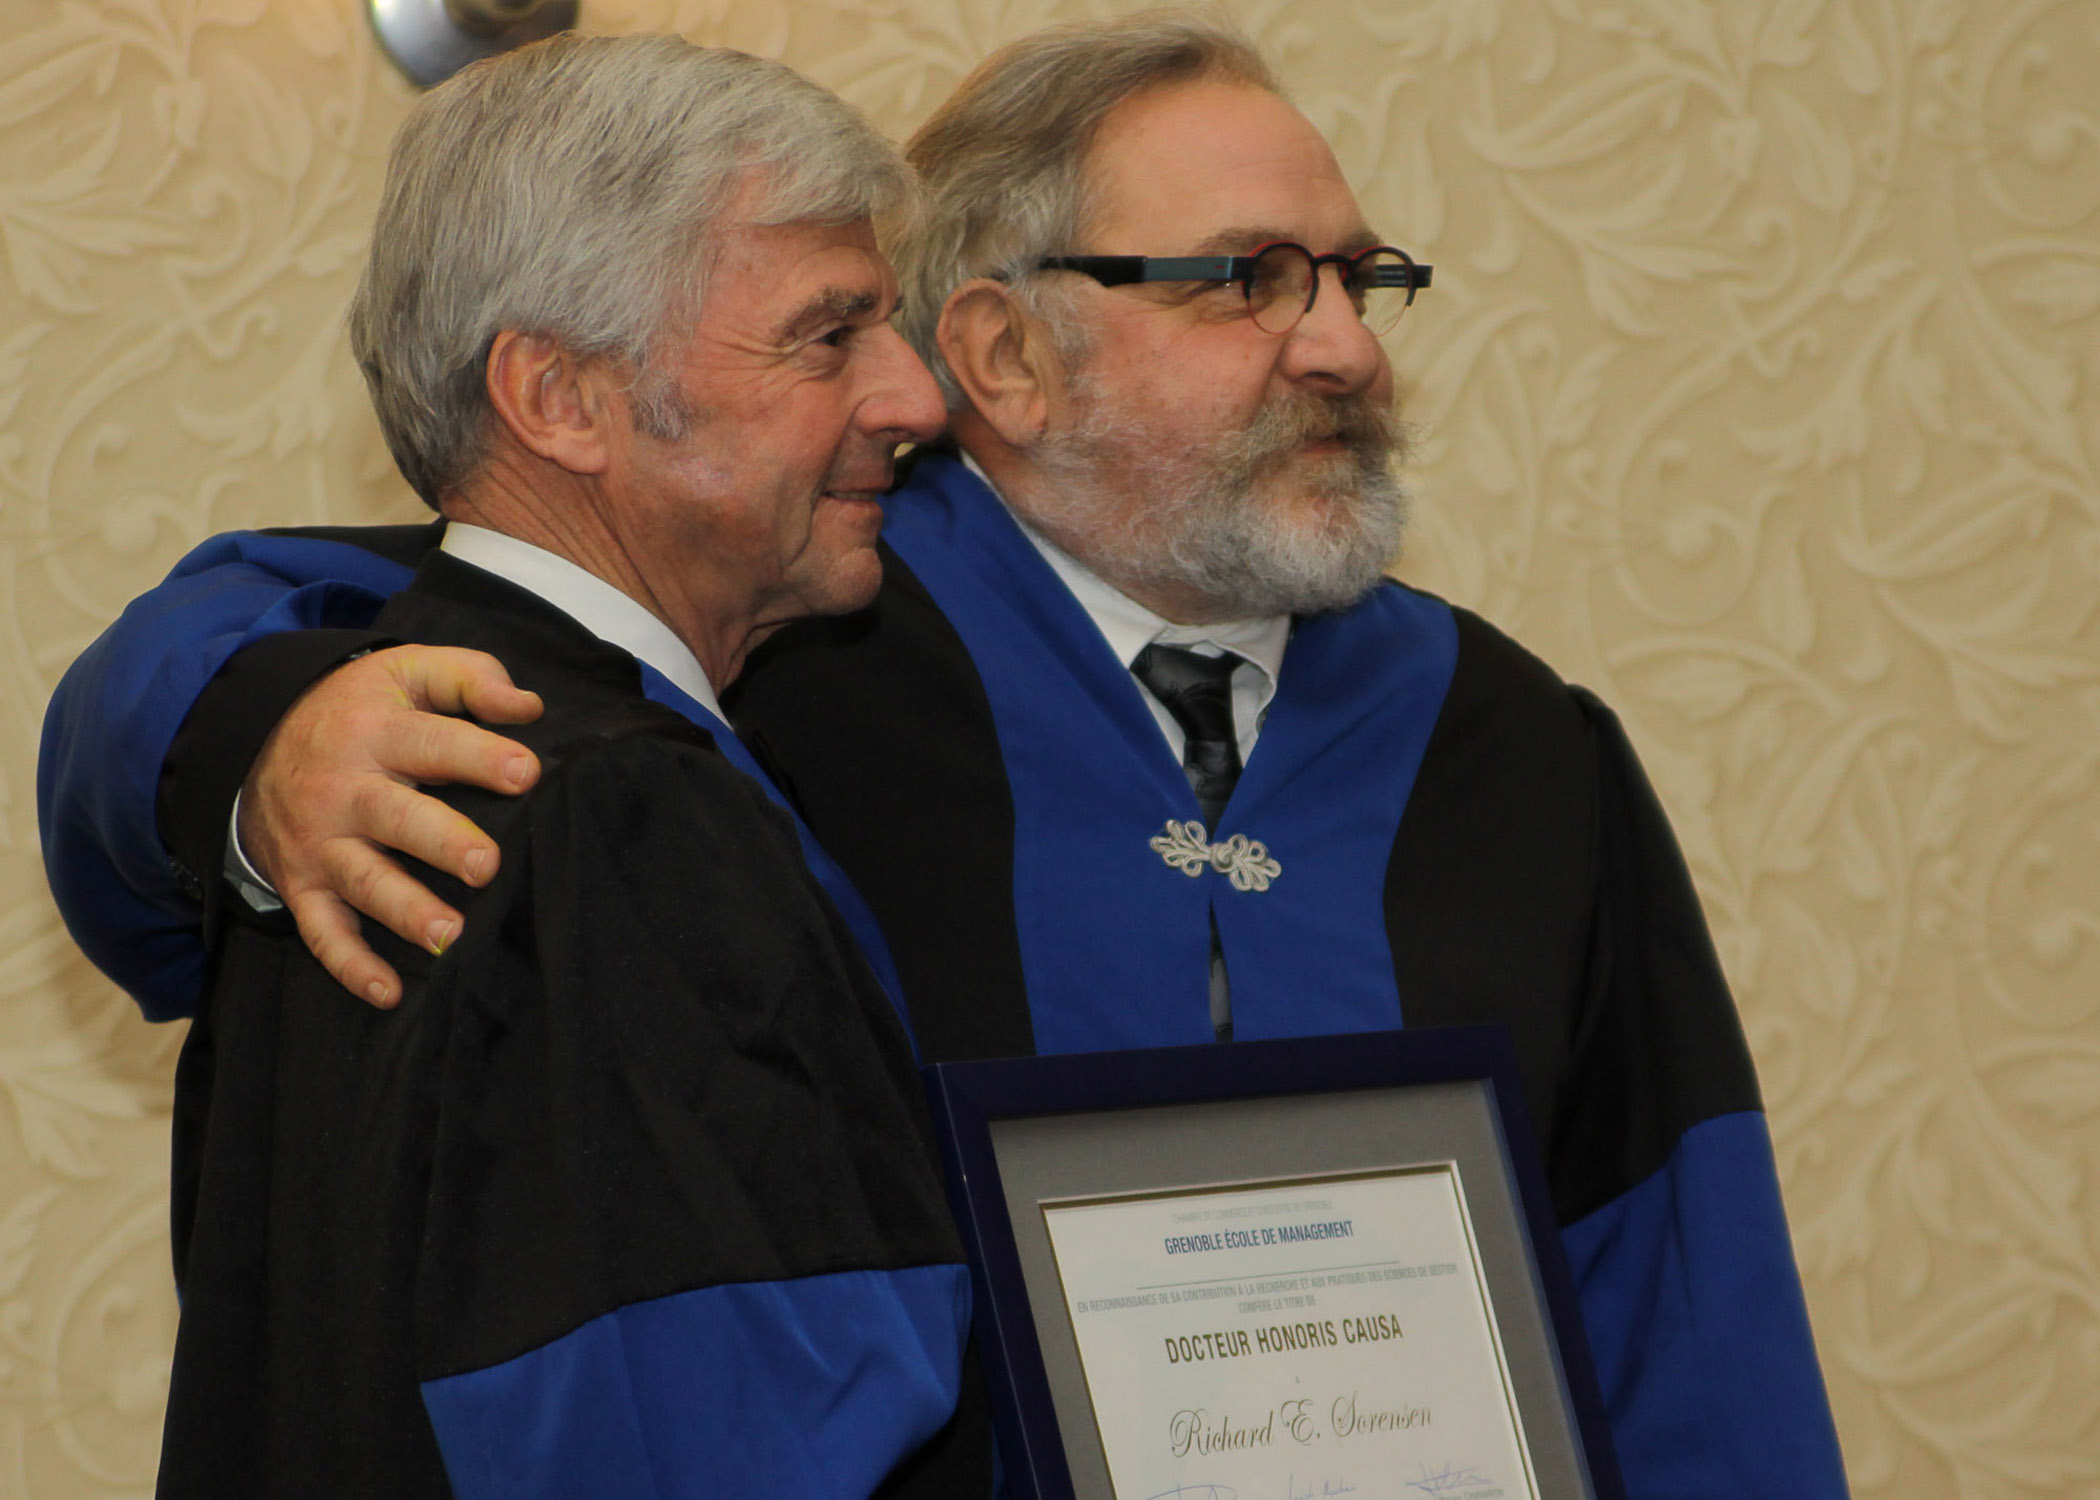 Pamplin Dean Richard E. Sorensen (left) and Thierry Grange of the Grenoble Ecole de Management pose with the honorary doctorate presented to Sorensen. 